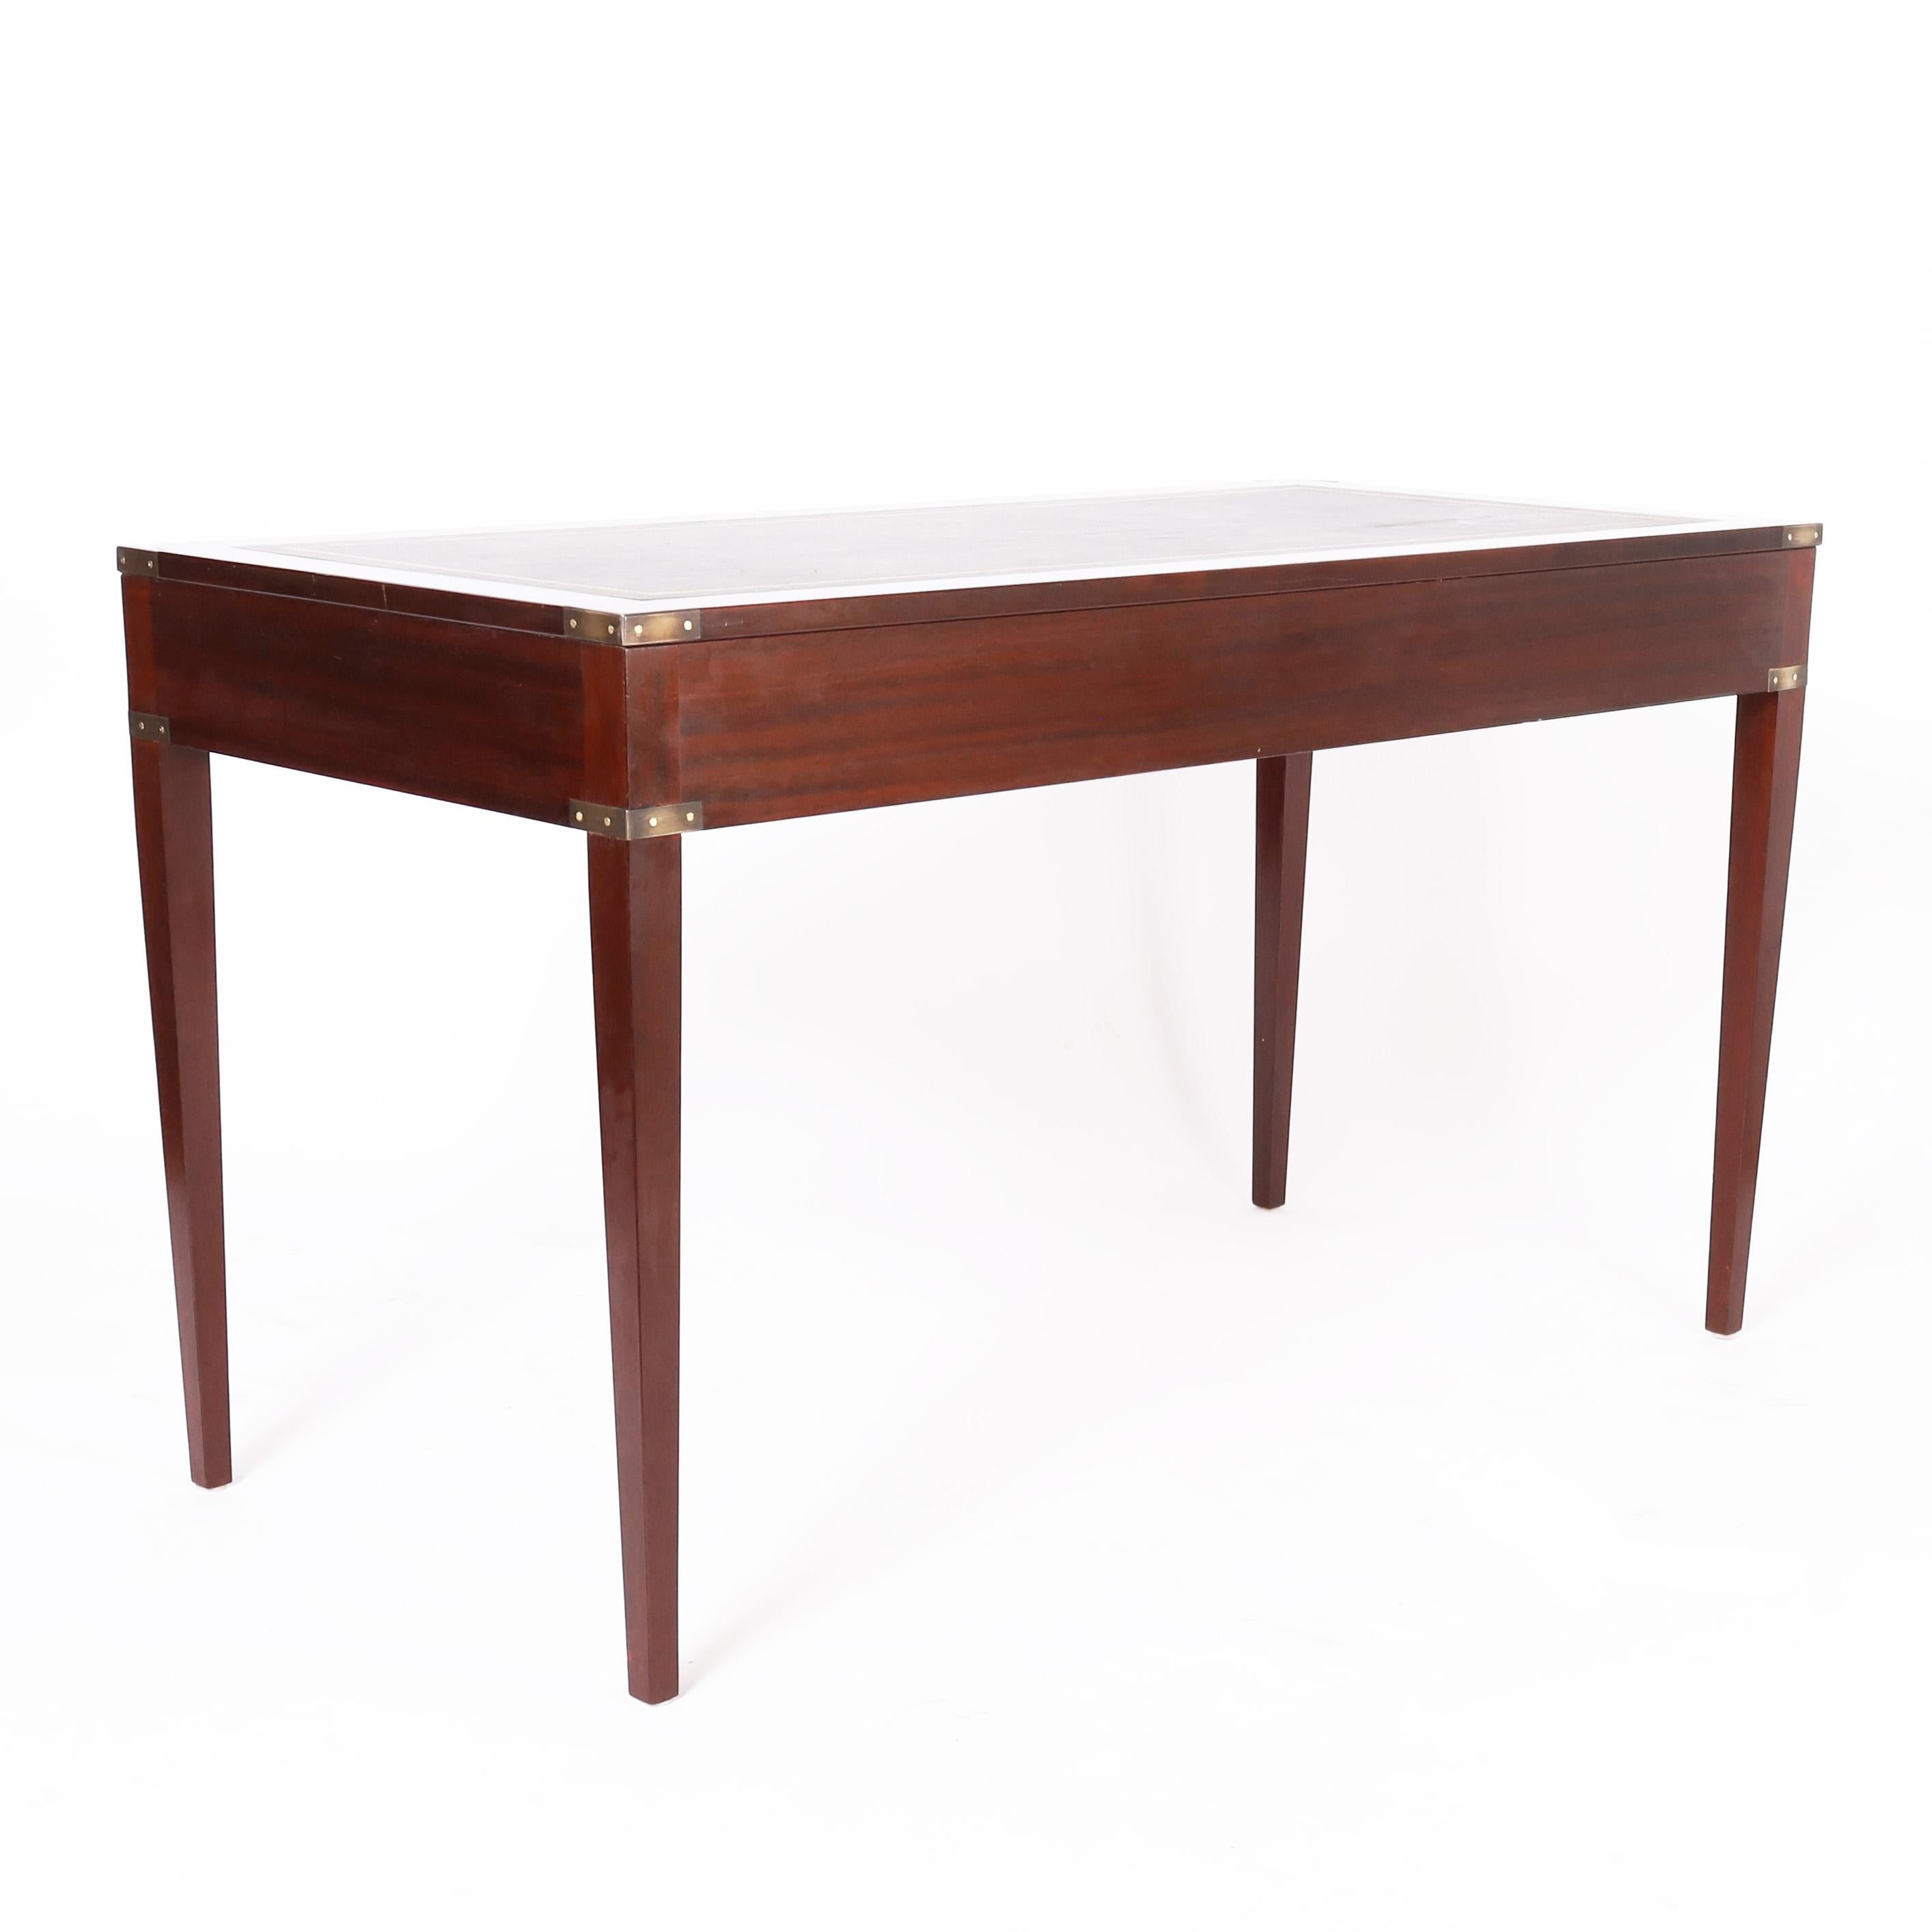 20th Century English Leather Top Campaign Style Desk For Sale